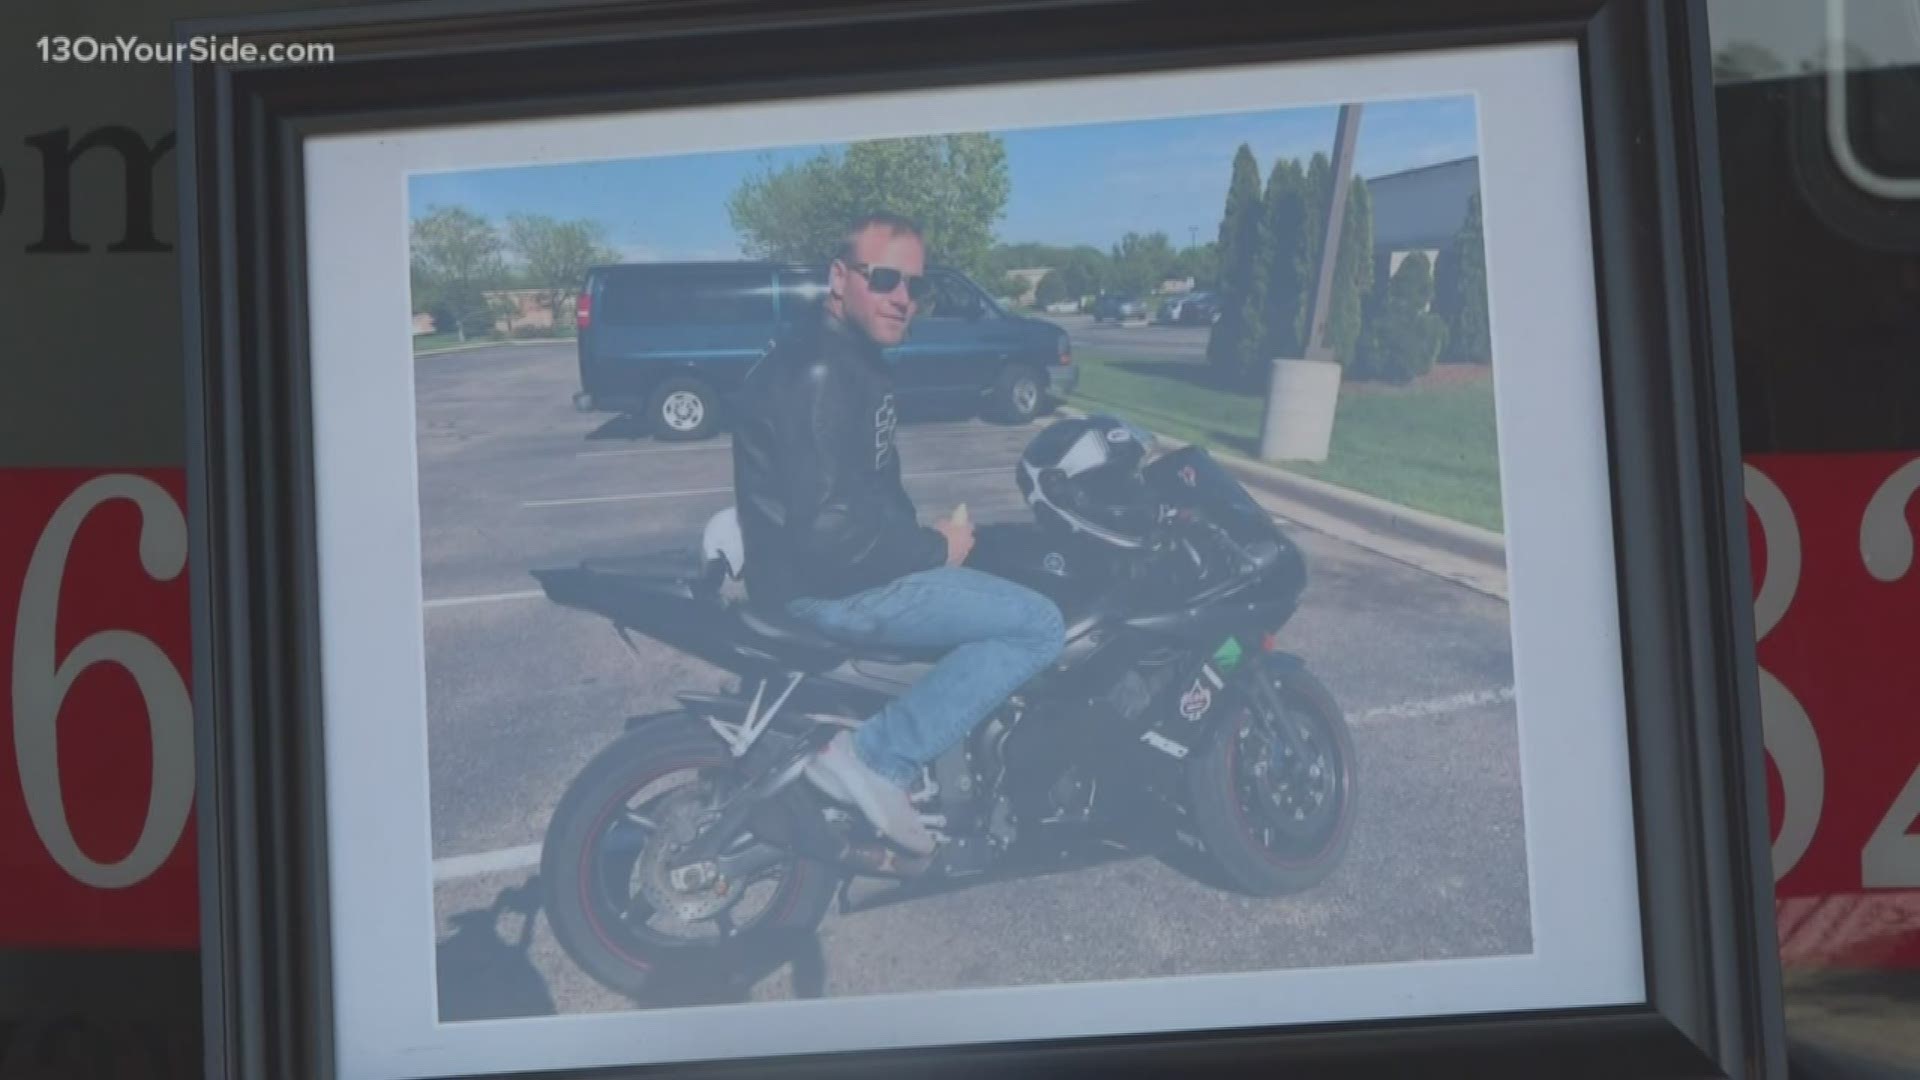 Holland motorcyclist remembers father killed in crash